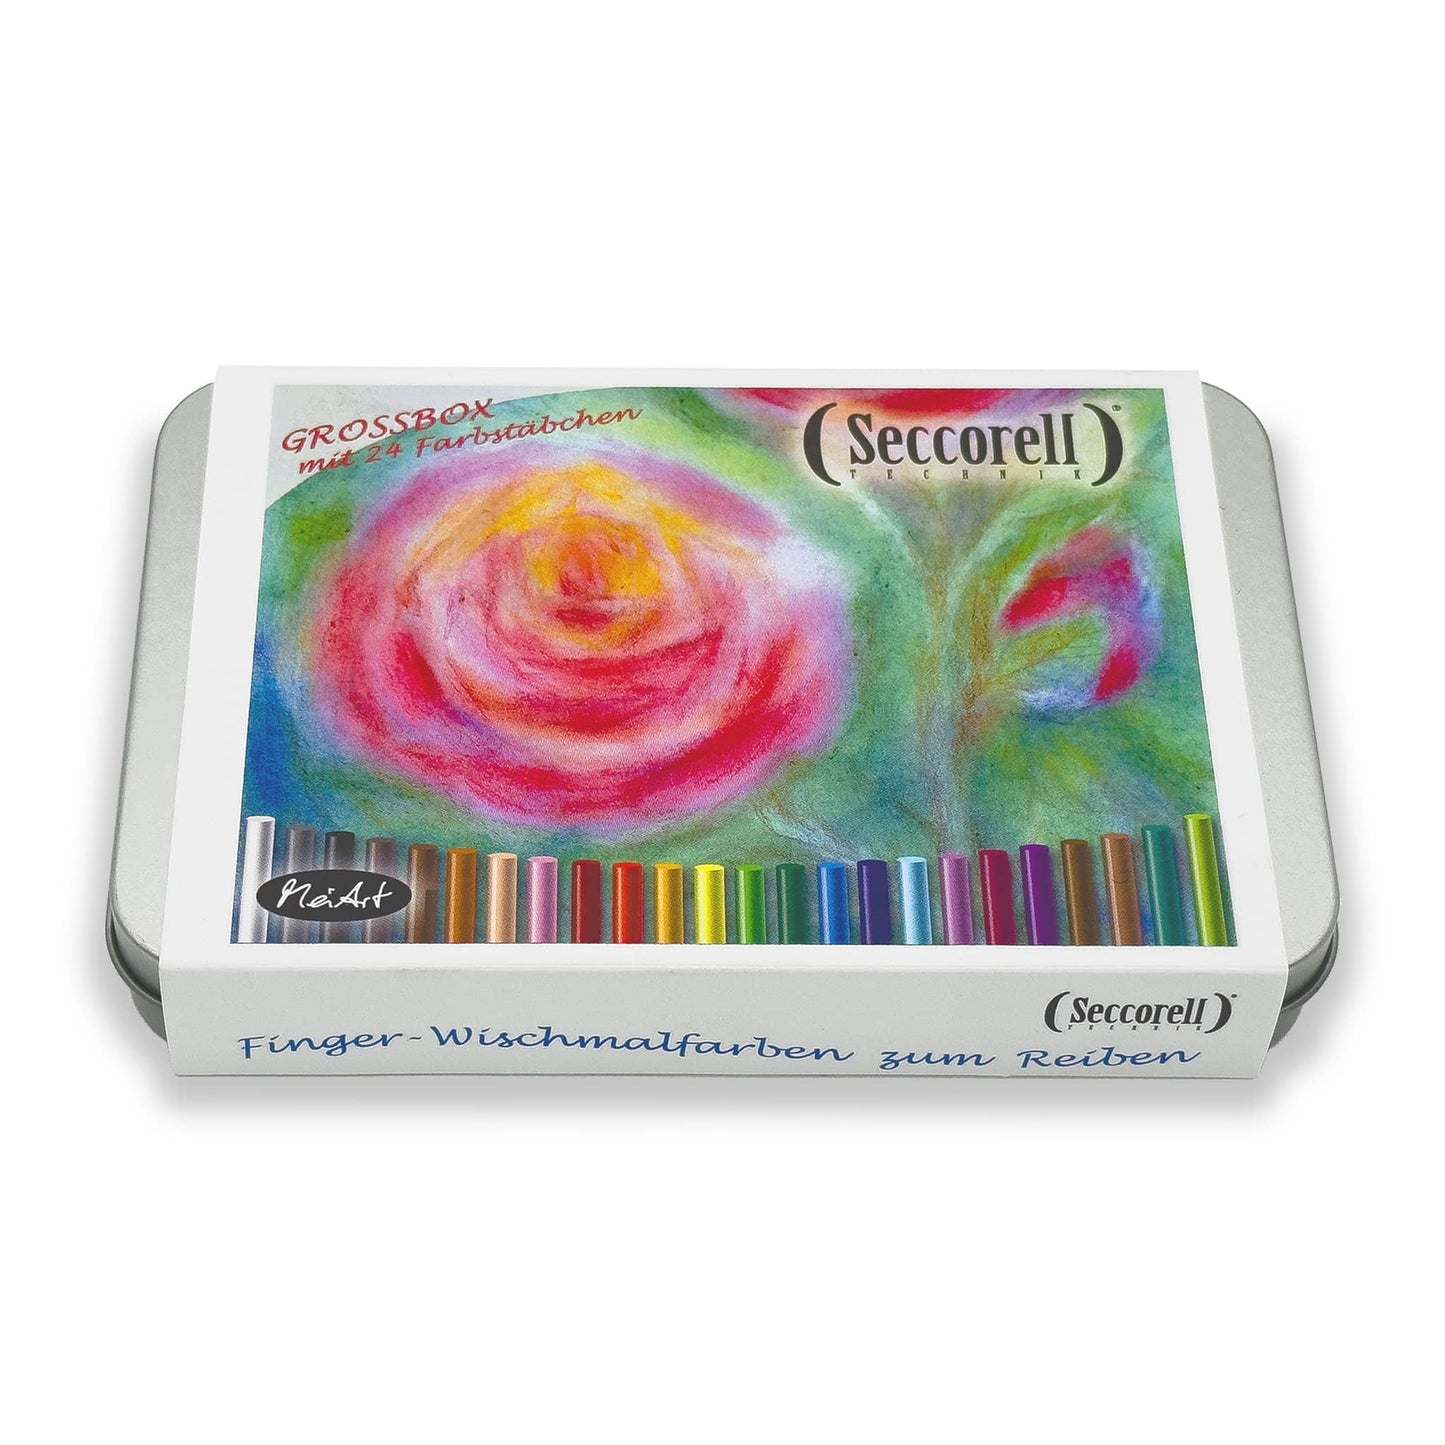 Seccorell large metal box, robust and stylish, contains 24 paint sticks for a wide range of creative possibilities with the finger wipe painting technique.